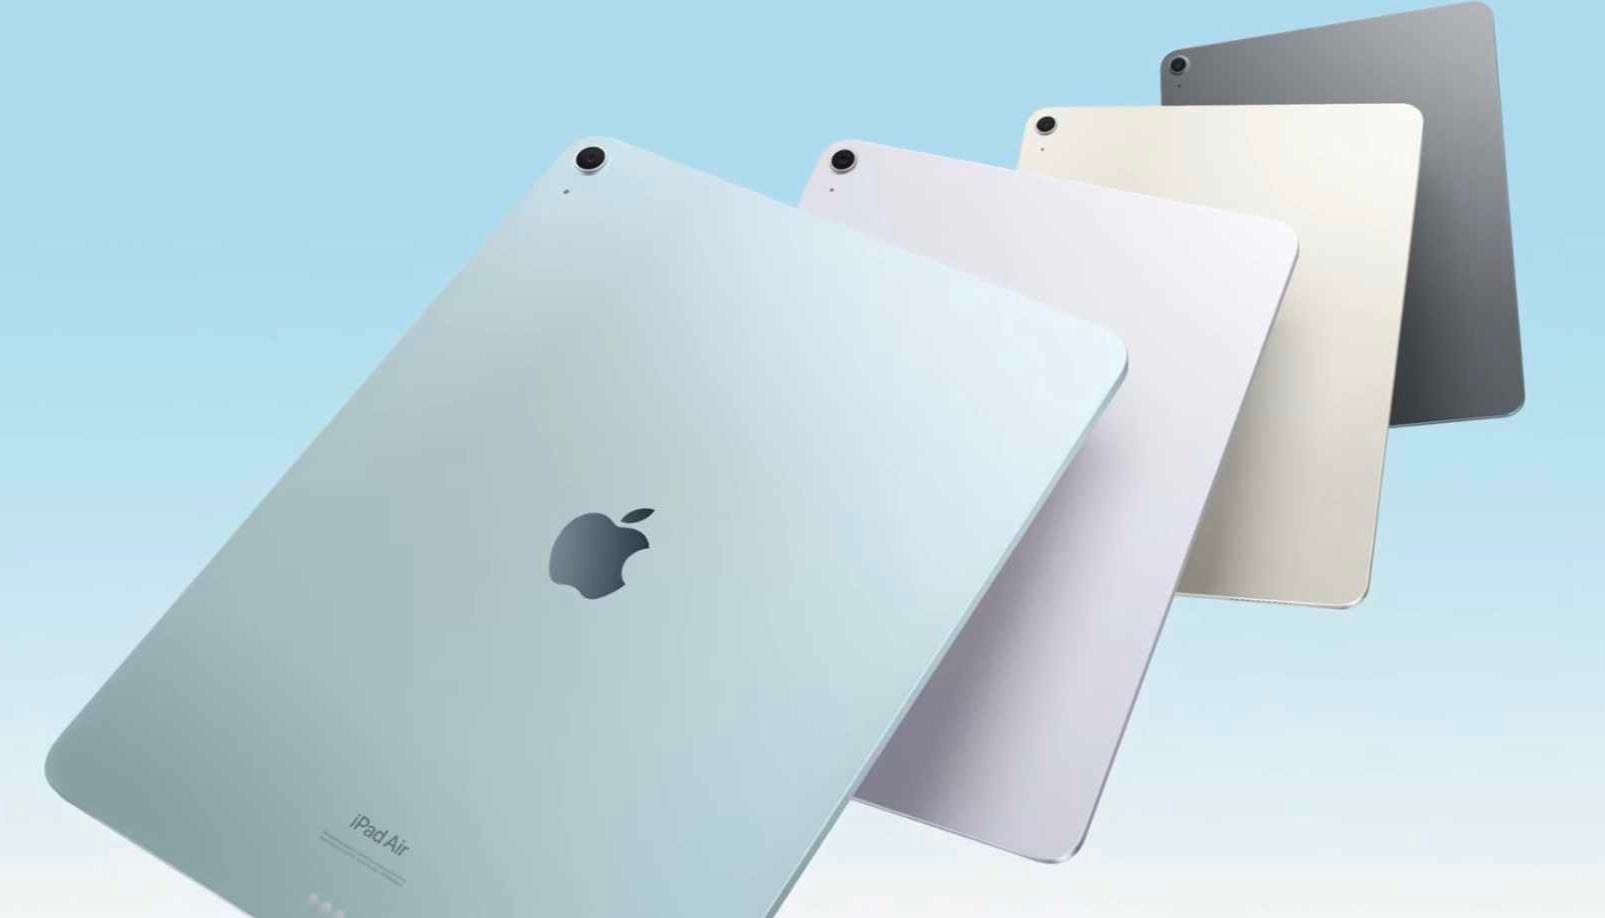 new ipad pro, air unveiled: see prices, release dates, new features for apple's latest devices